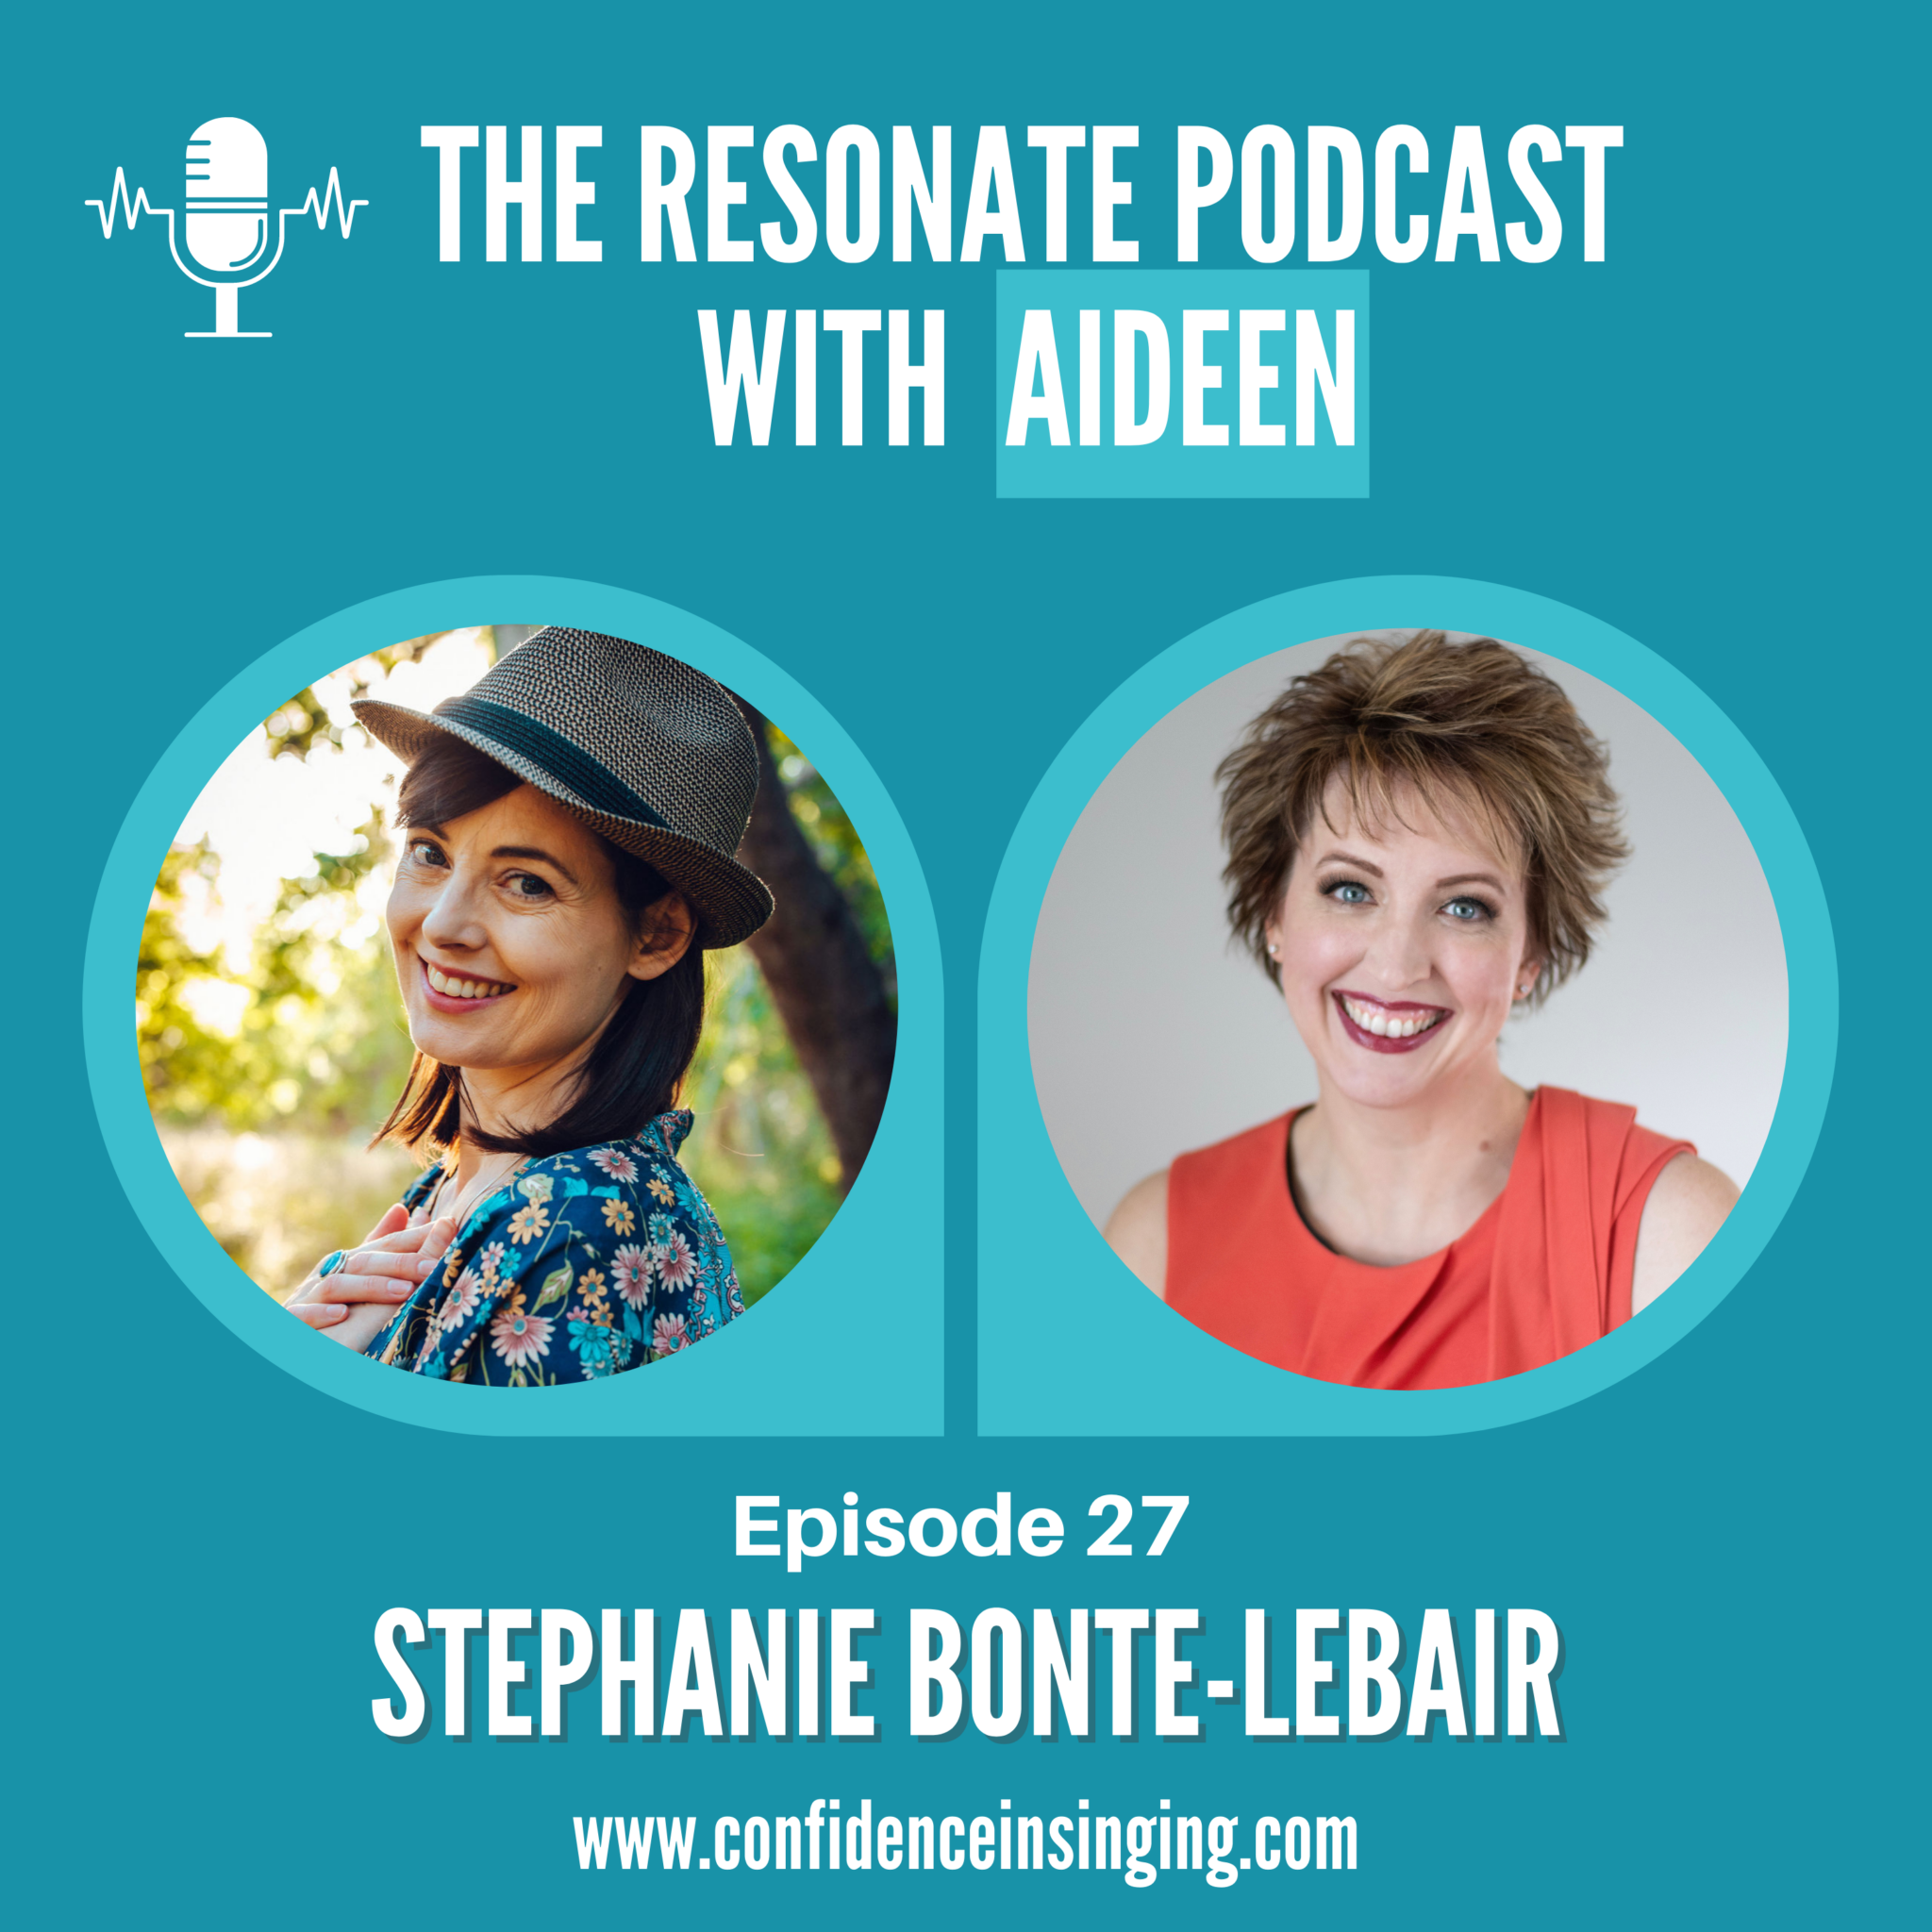 The Resonate Podcast with Aideen Episode